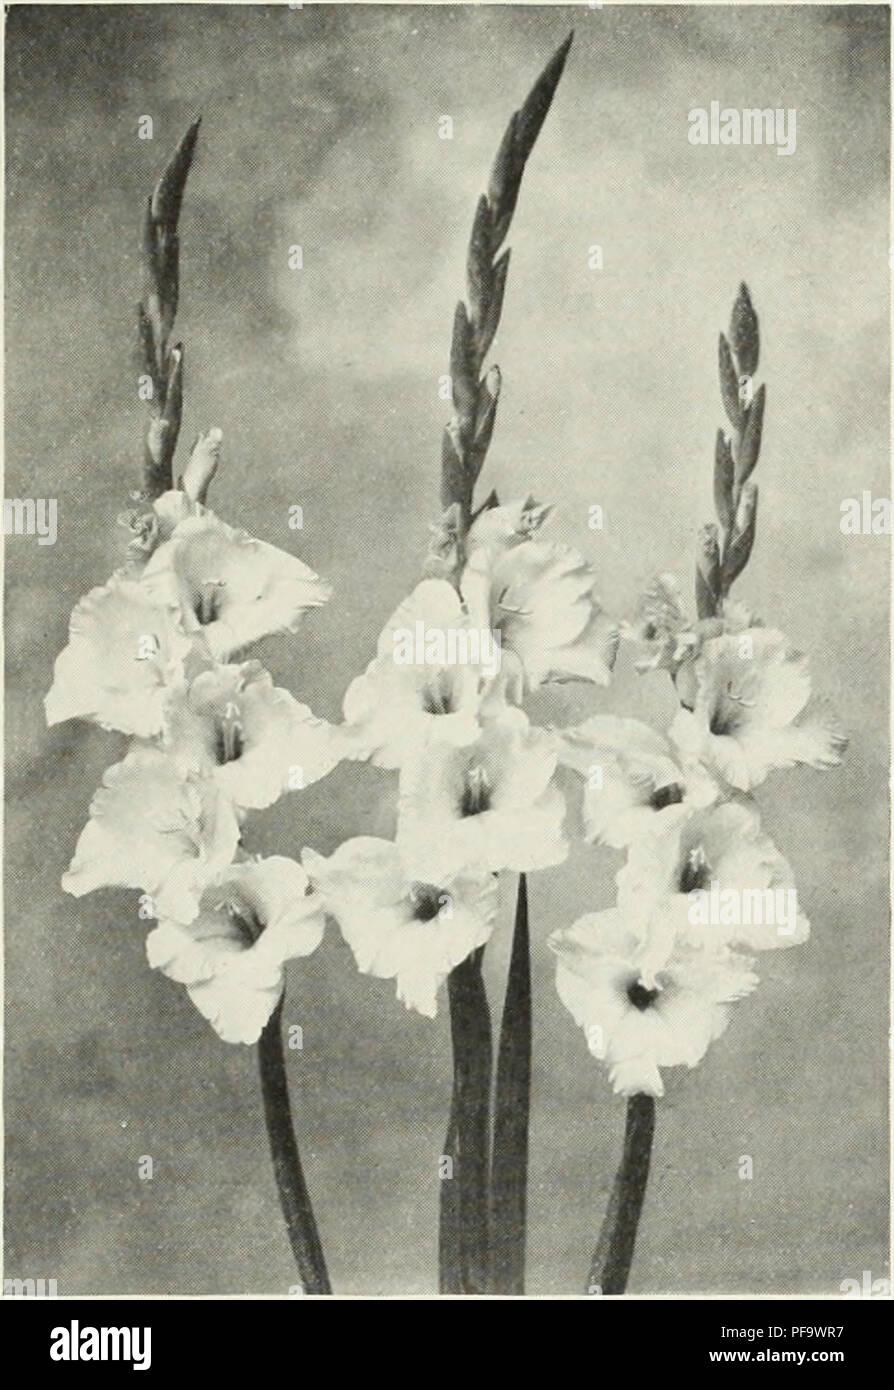 . Descriptive list : gladiolus and delphiniums. Nurseries (Horticulture) Vermont Burlington Catalogs; Nursery stock Vermont Burlington Catalogs; Bulbs (Plants) Vermont Burlington Catalogs; Gladiolus Vermont Burlington Catalogs; Delphinium Vermont Burlington Catalogs. Small Bulbs of the Cheaper Varieties Would Make Some Beginner Happy. Annie Laurie PRIMULINUS VARIETIES These constitute a distinct type of gladiolus in that in most of them the upper petal hangs down forming more or less of a hood. The stems are usually more slender and the flowers smaller than in the others so that they make a li Stock Photo